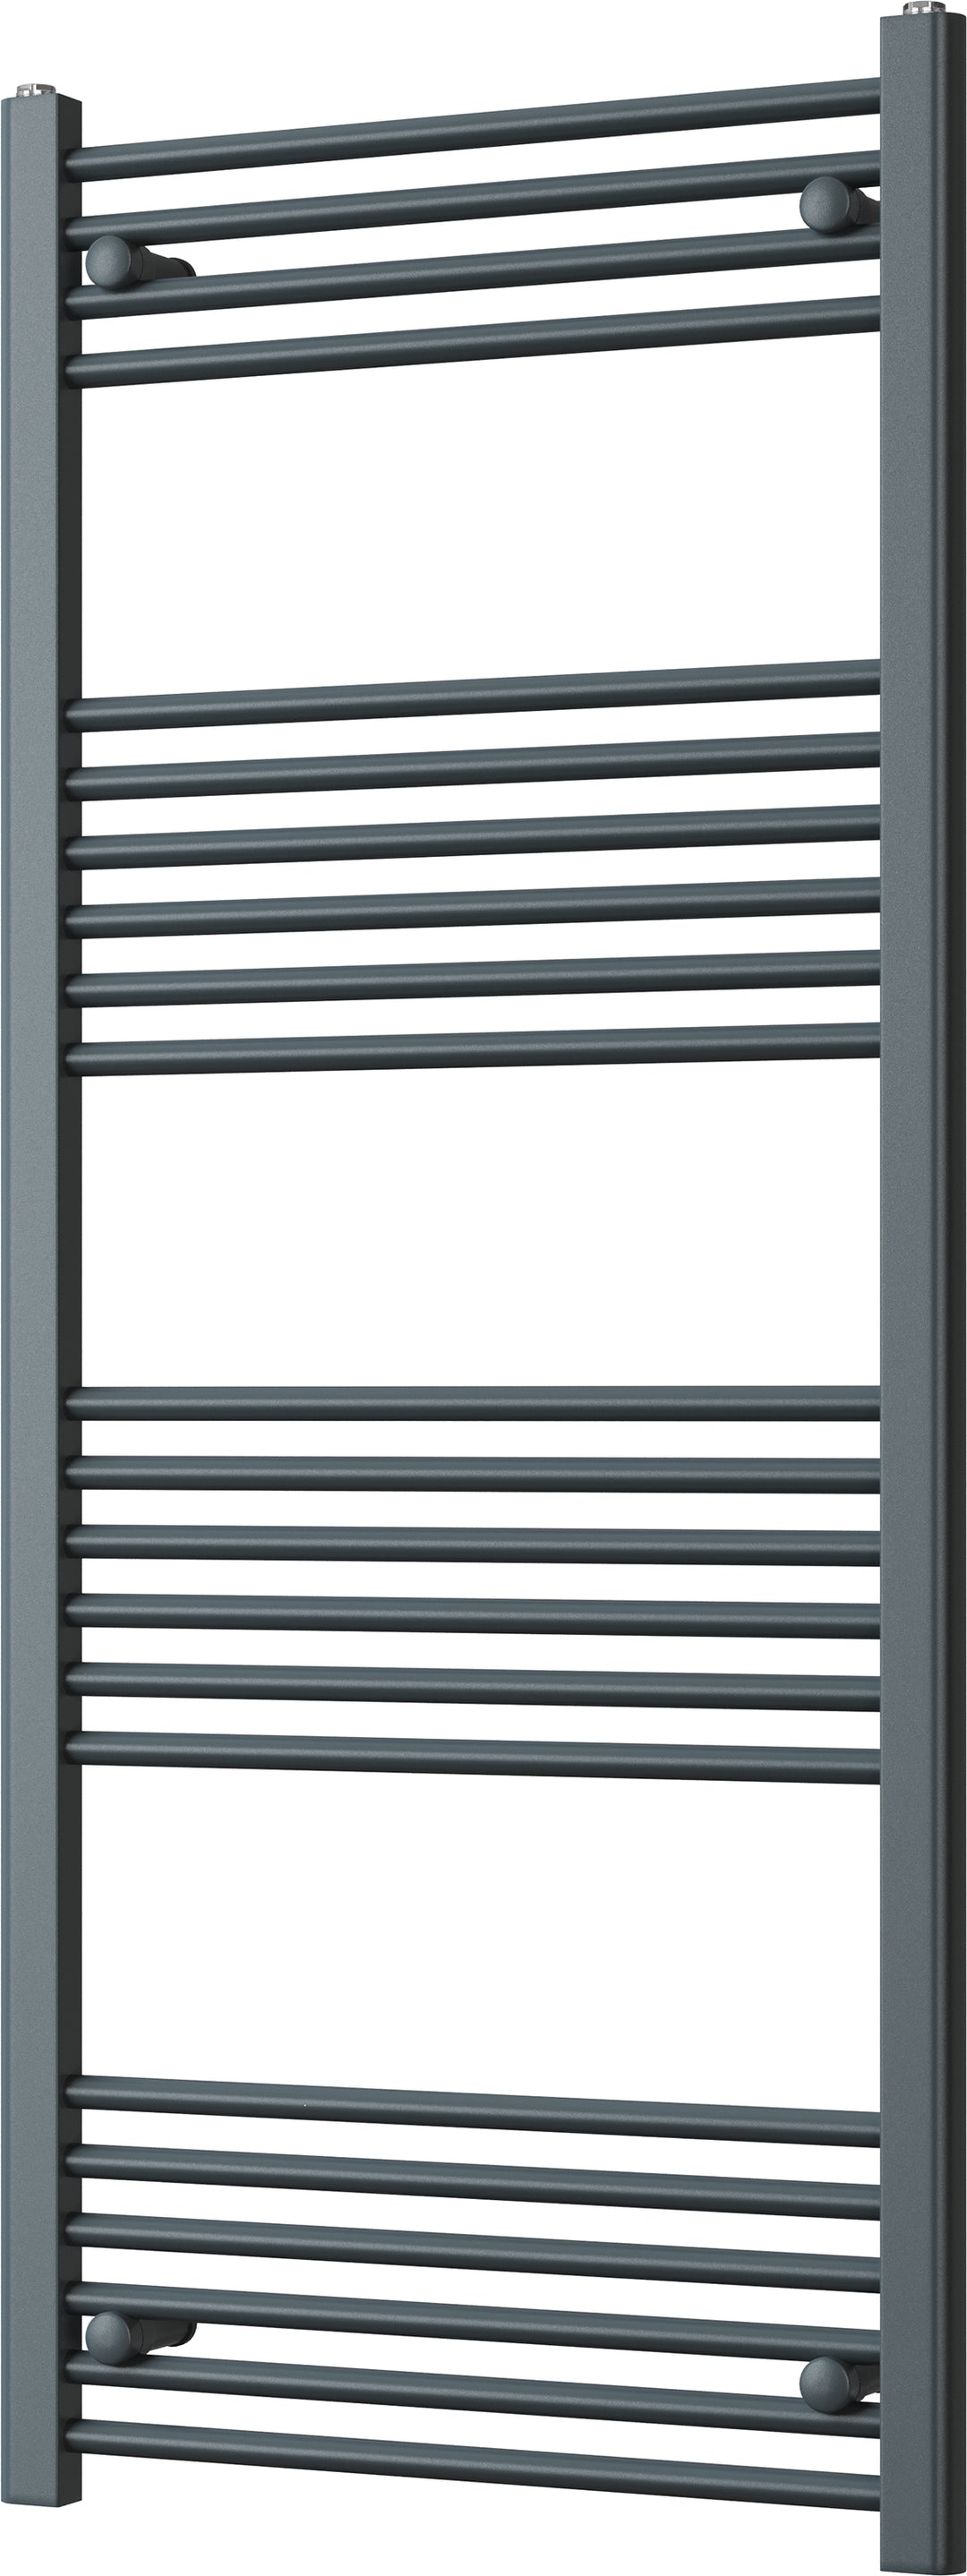 Zennor - Anthracite Heated Towel Rail - H1400mm x W600mm - Straight